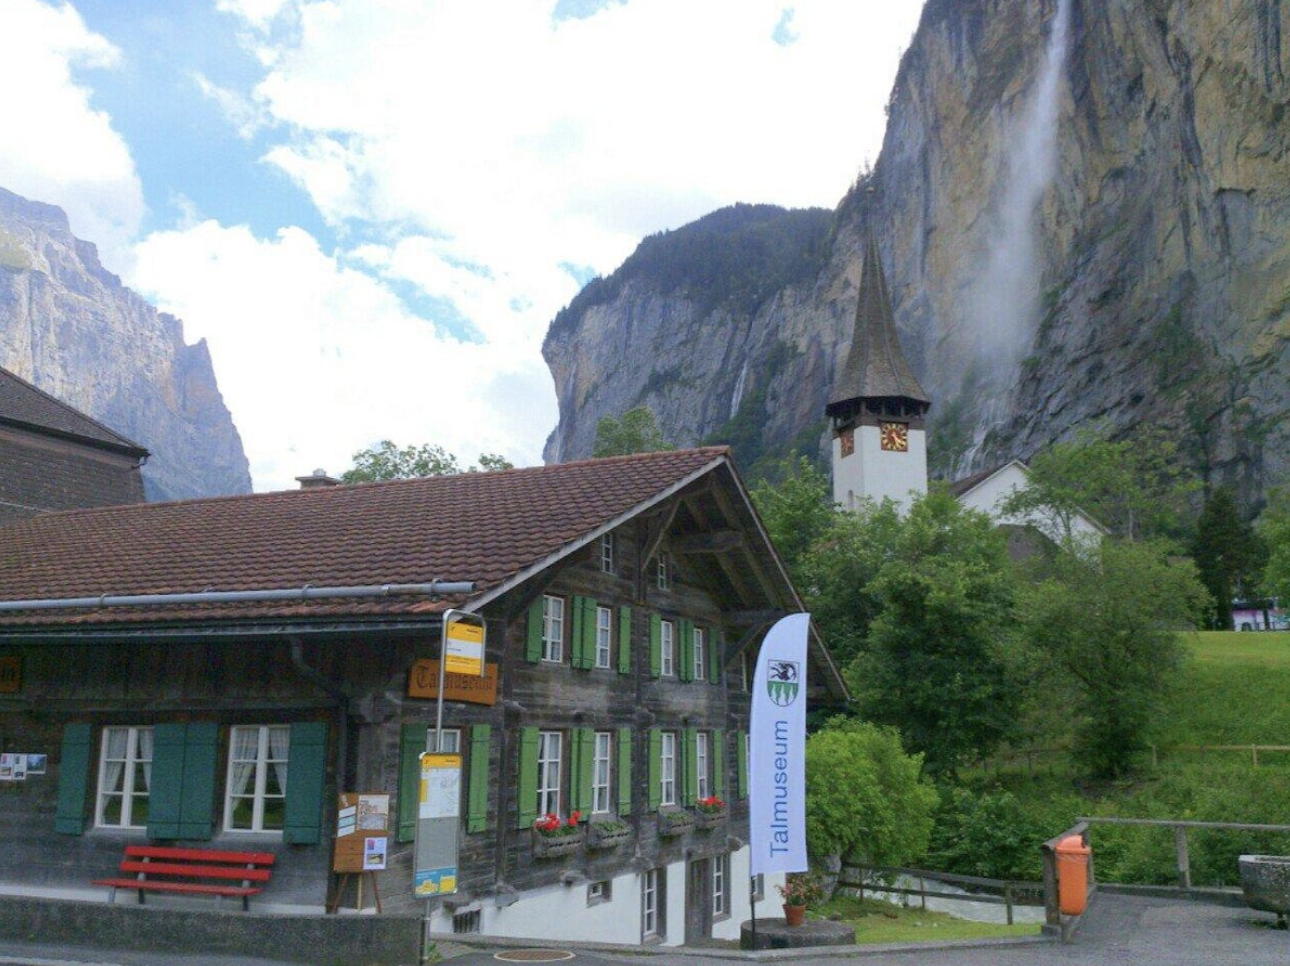 The Ultimate Guide to Lauterbrunnen, Switzerland: Things to Do, What to Eat, & Where to Stay